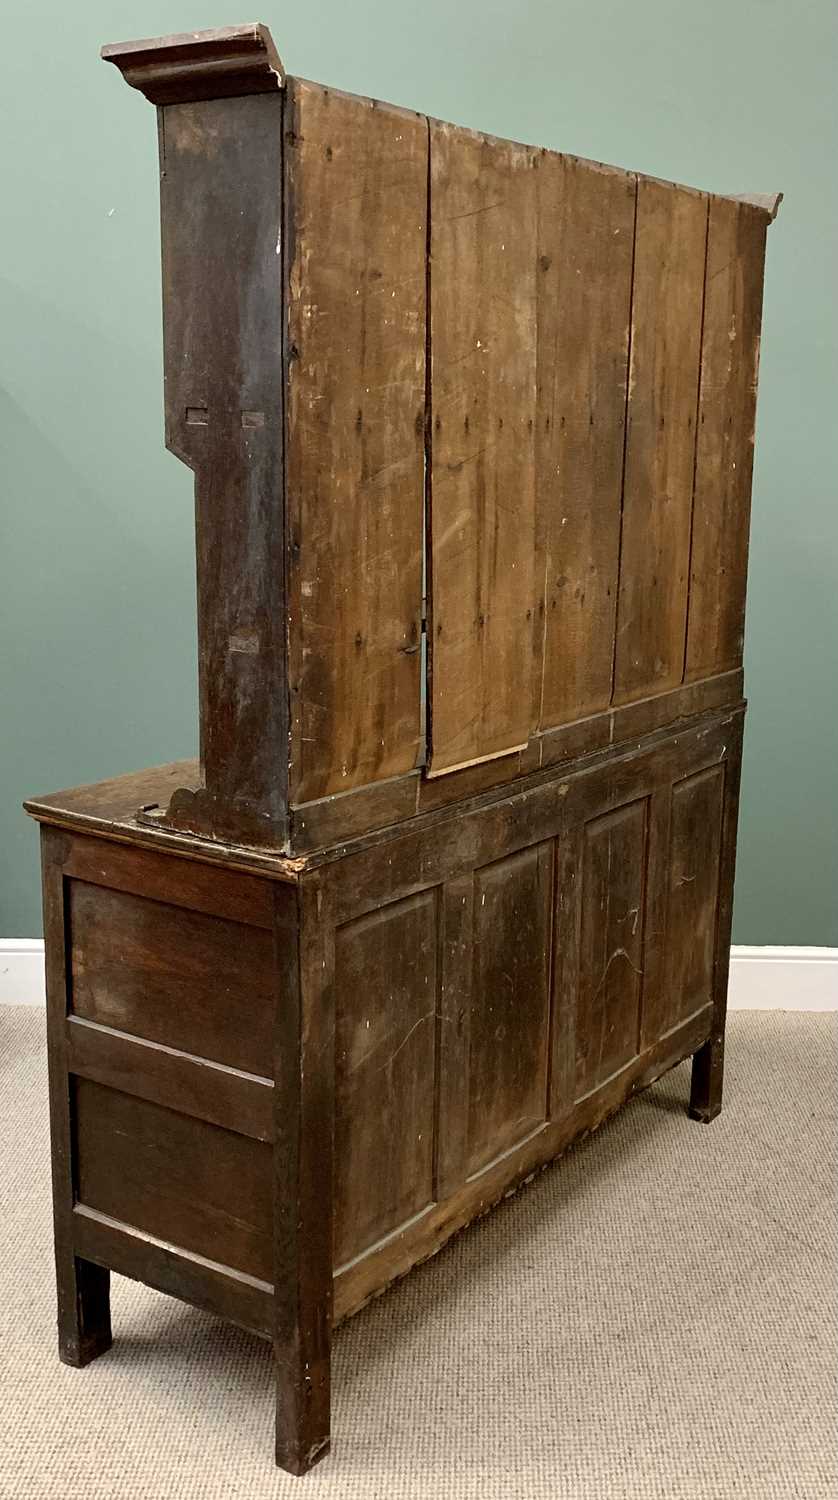 EARLY 19th CENTURY OAK WELSH DRESSER, the three shelf rack with wide backboards over a base of three - Image 5 of 5